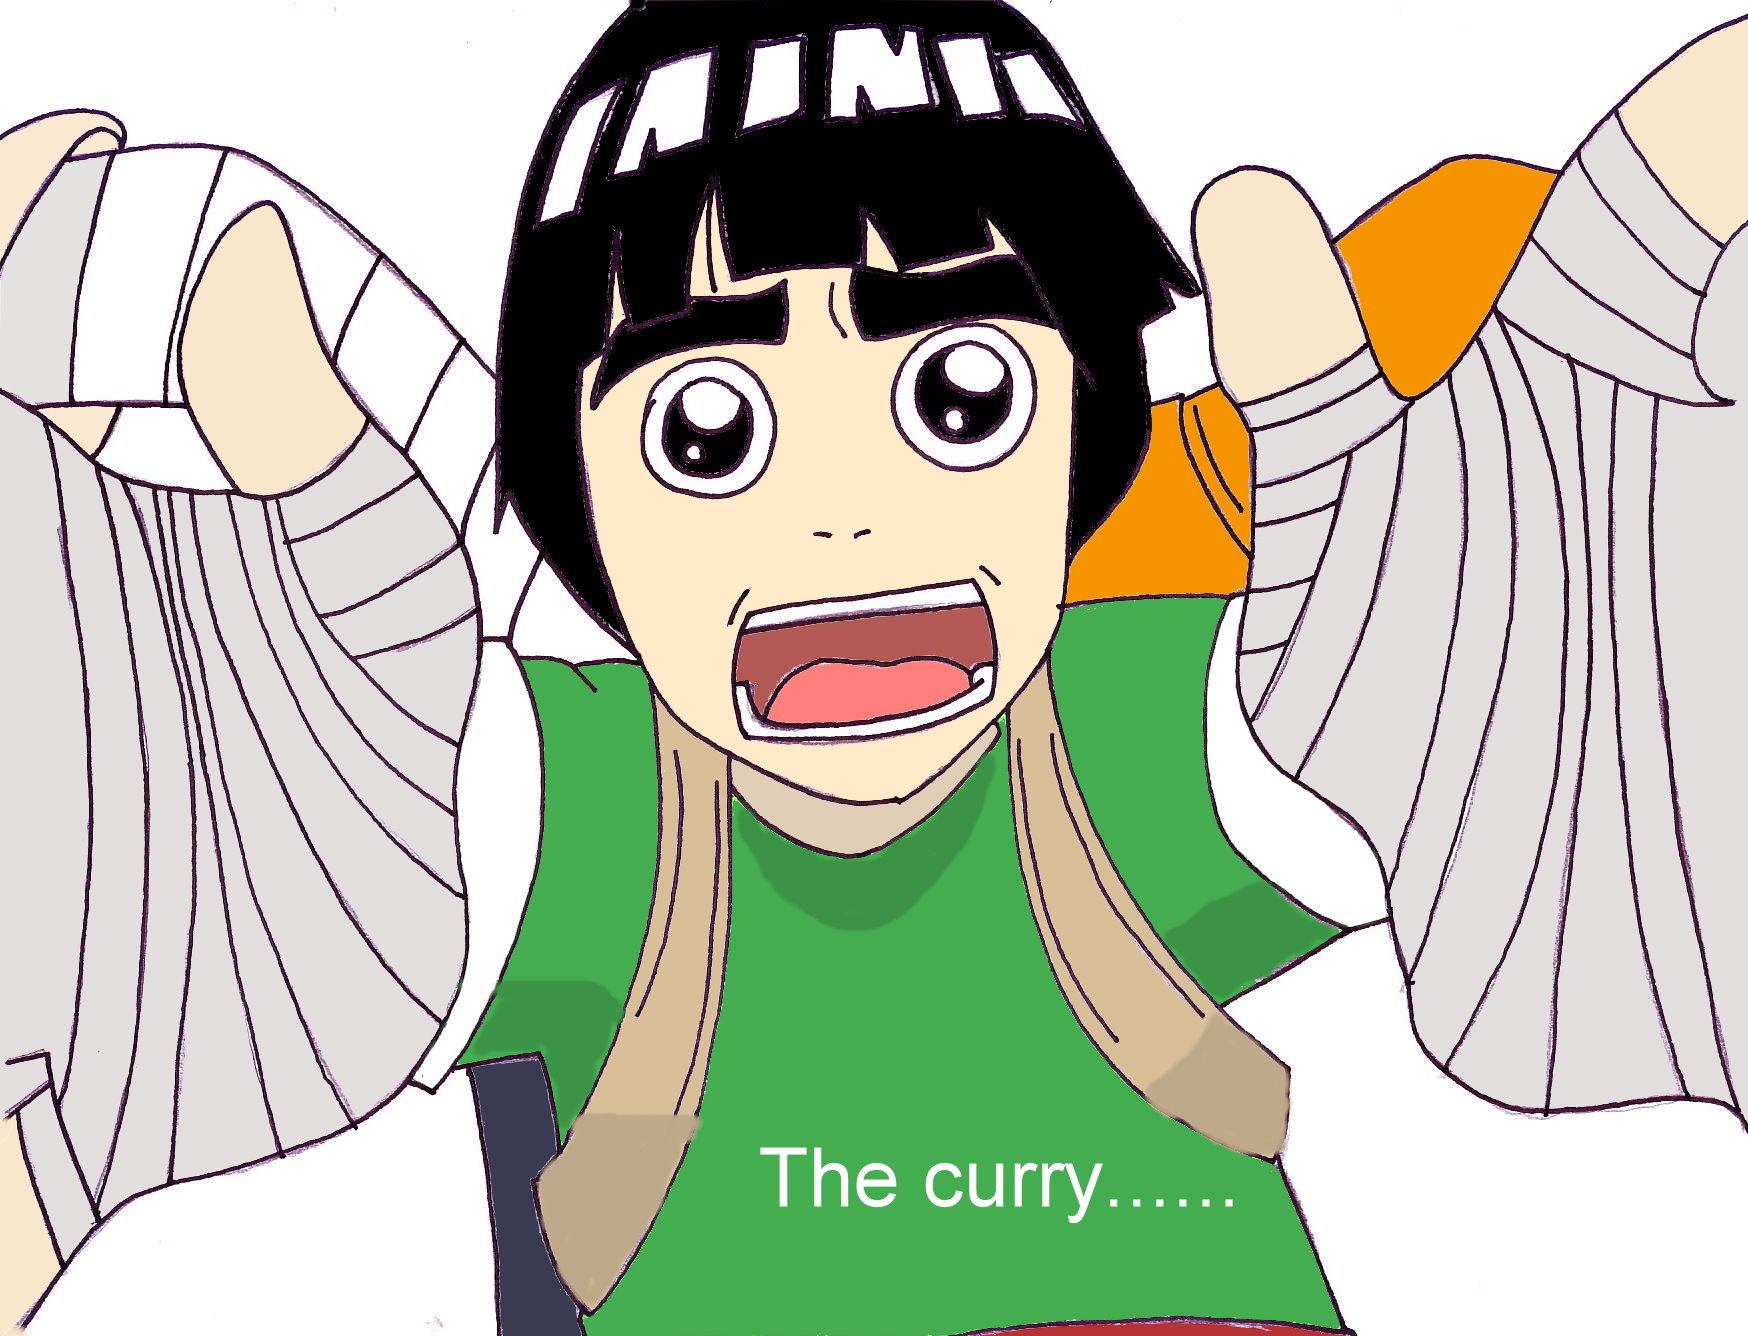 The curry..... by InvaderAvatarTitan13